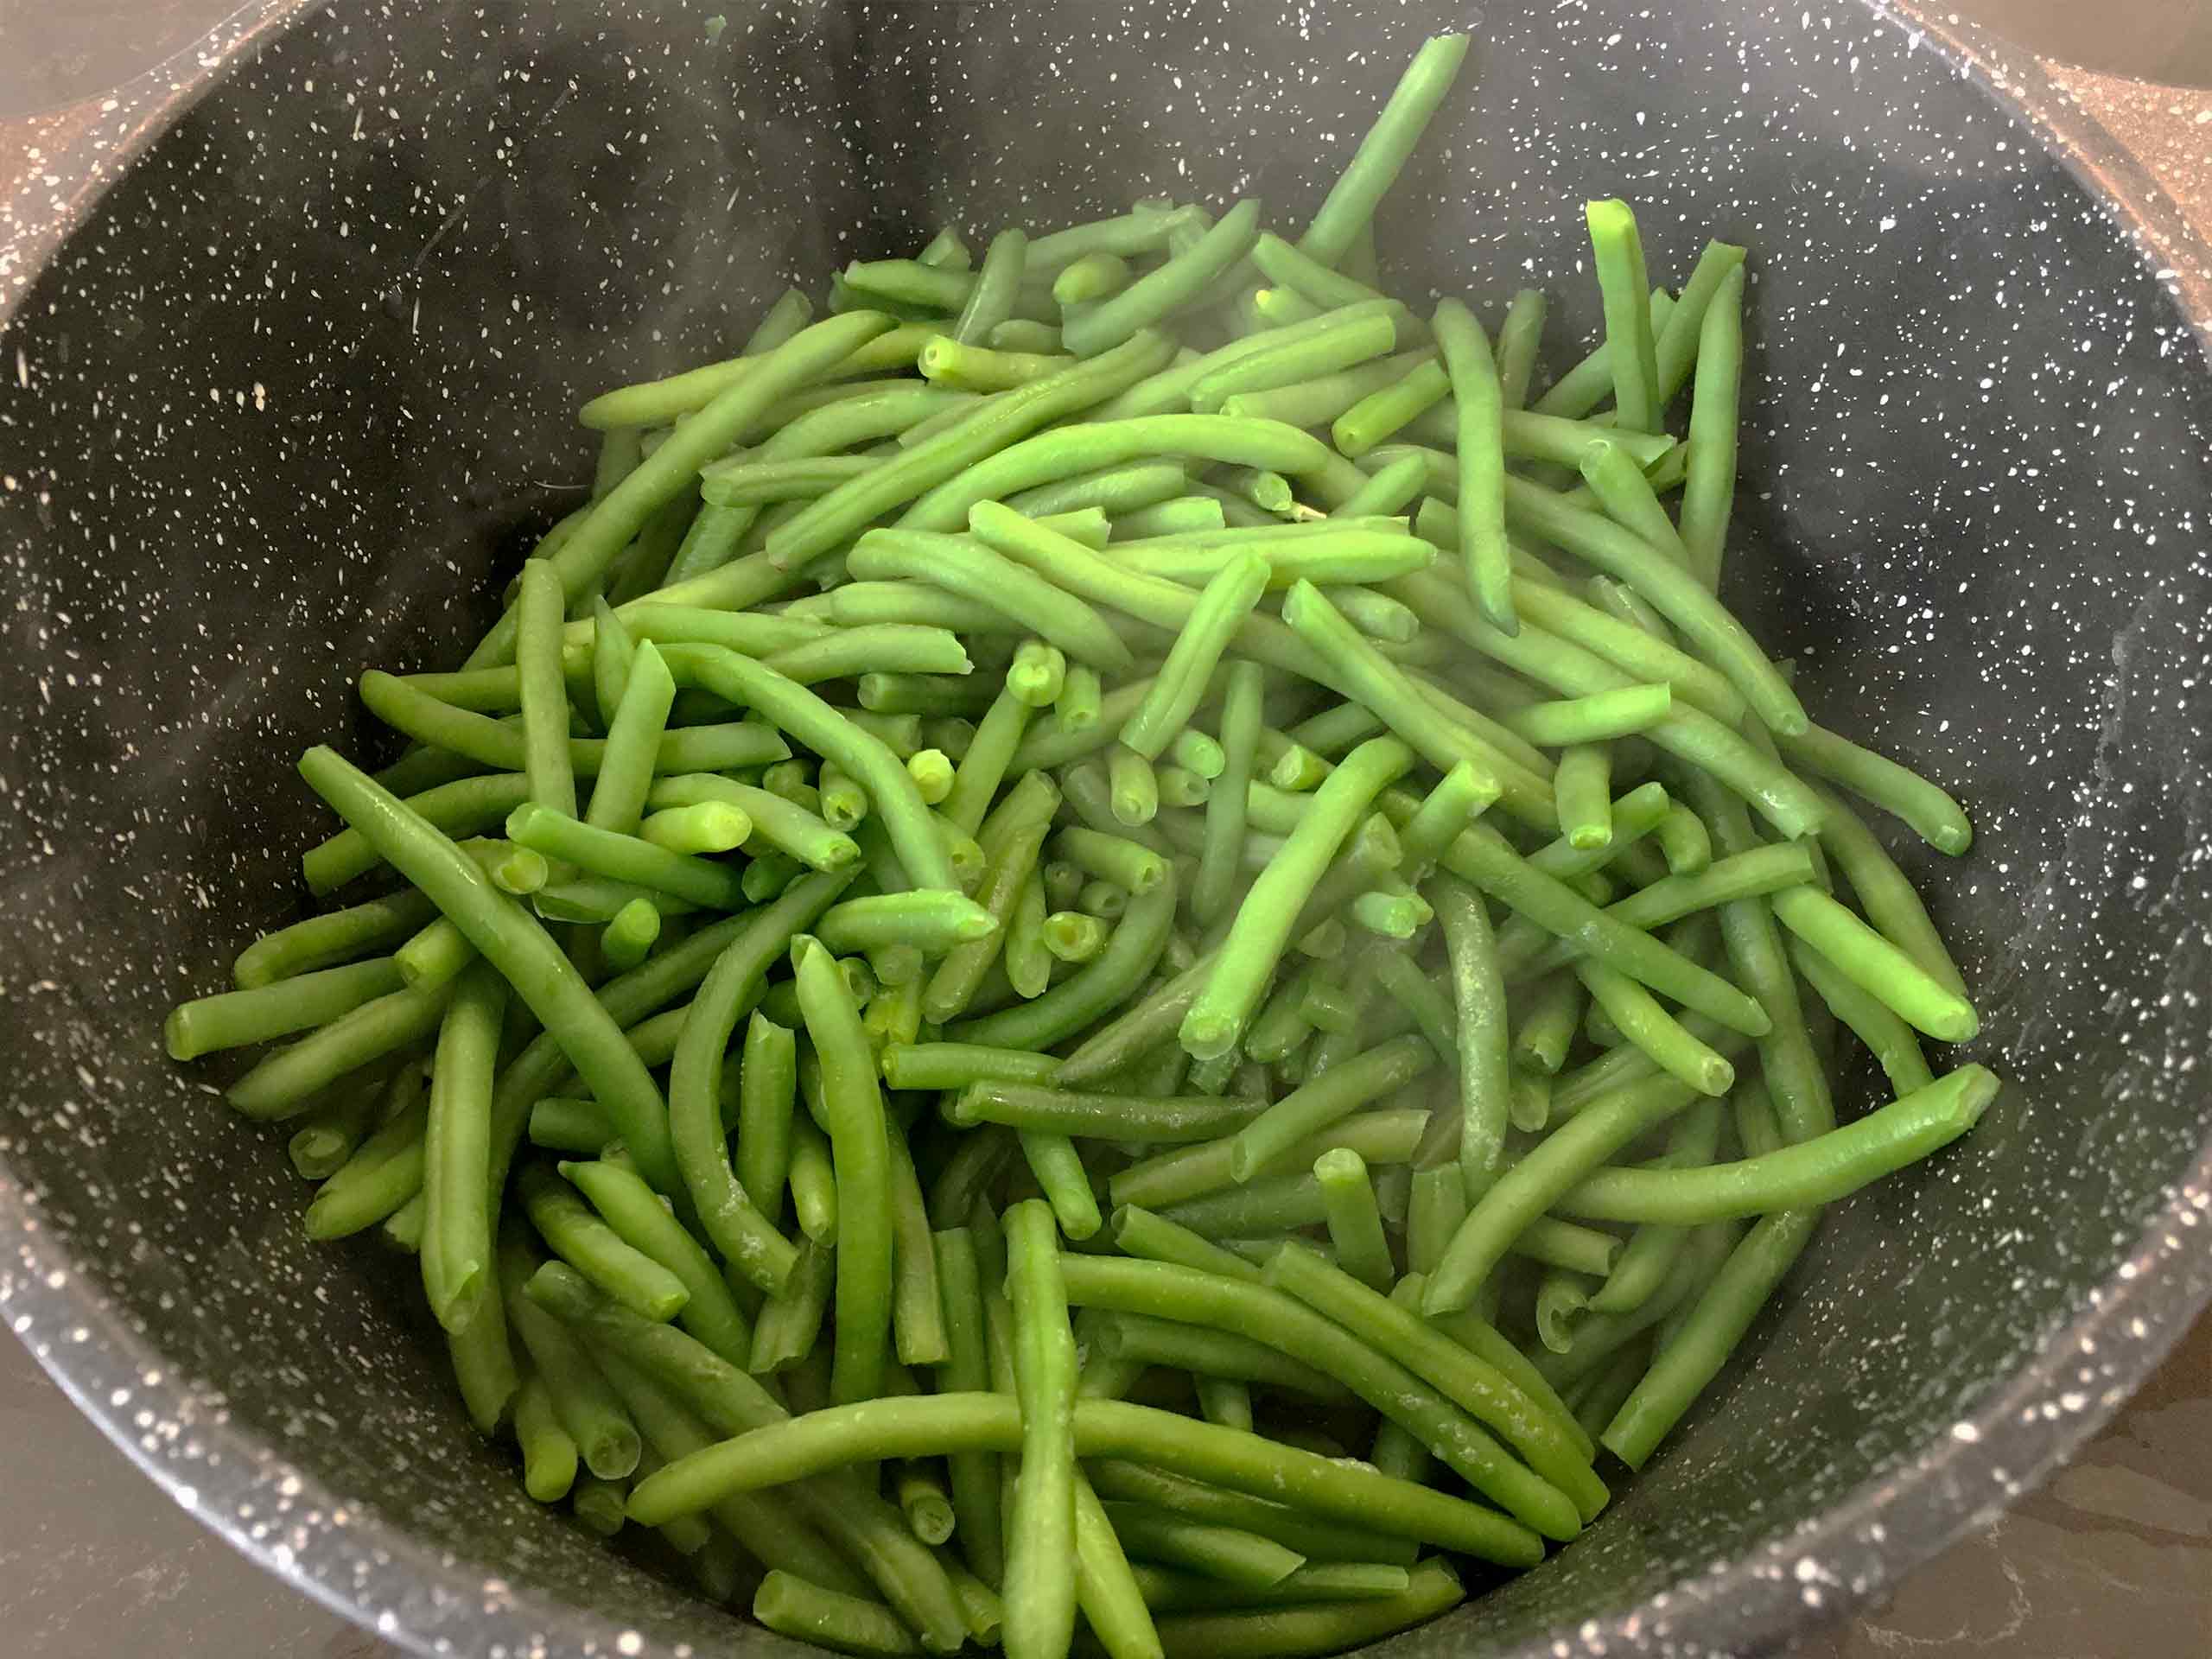 Drain the water from the green beans in soy sauce